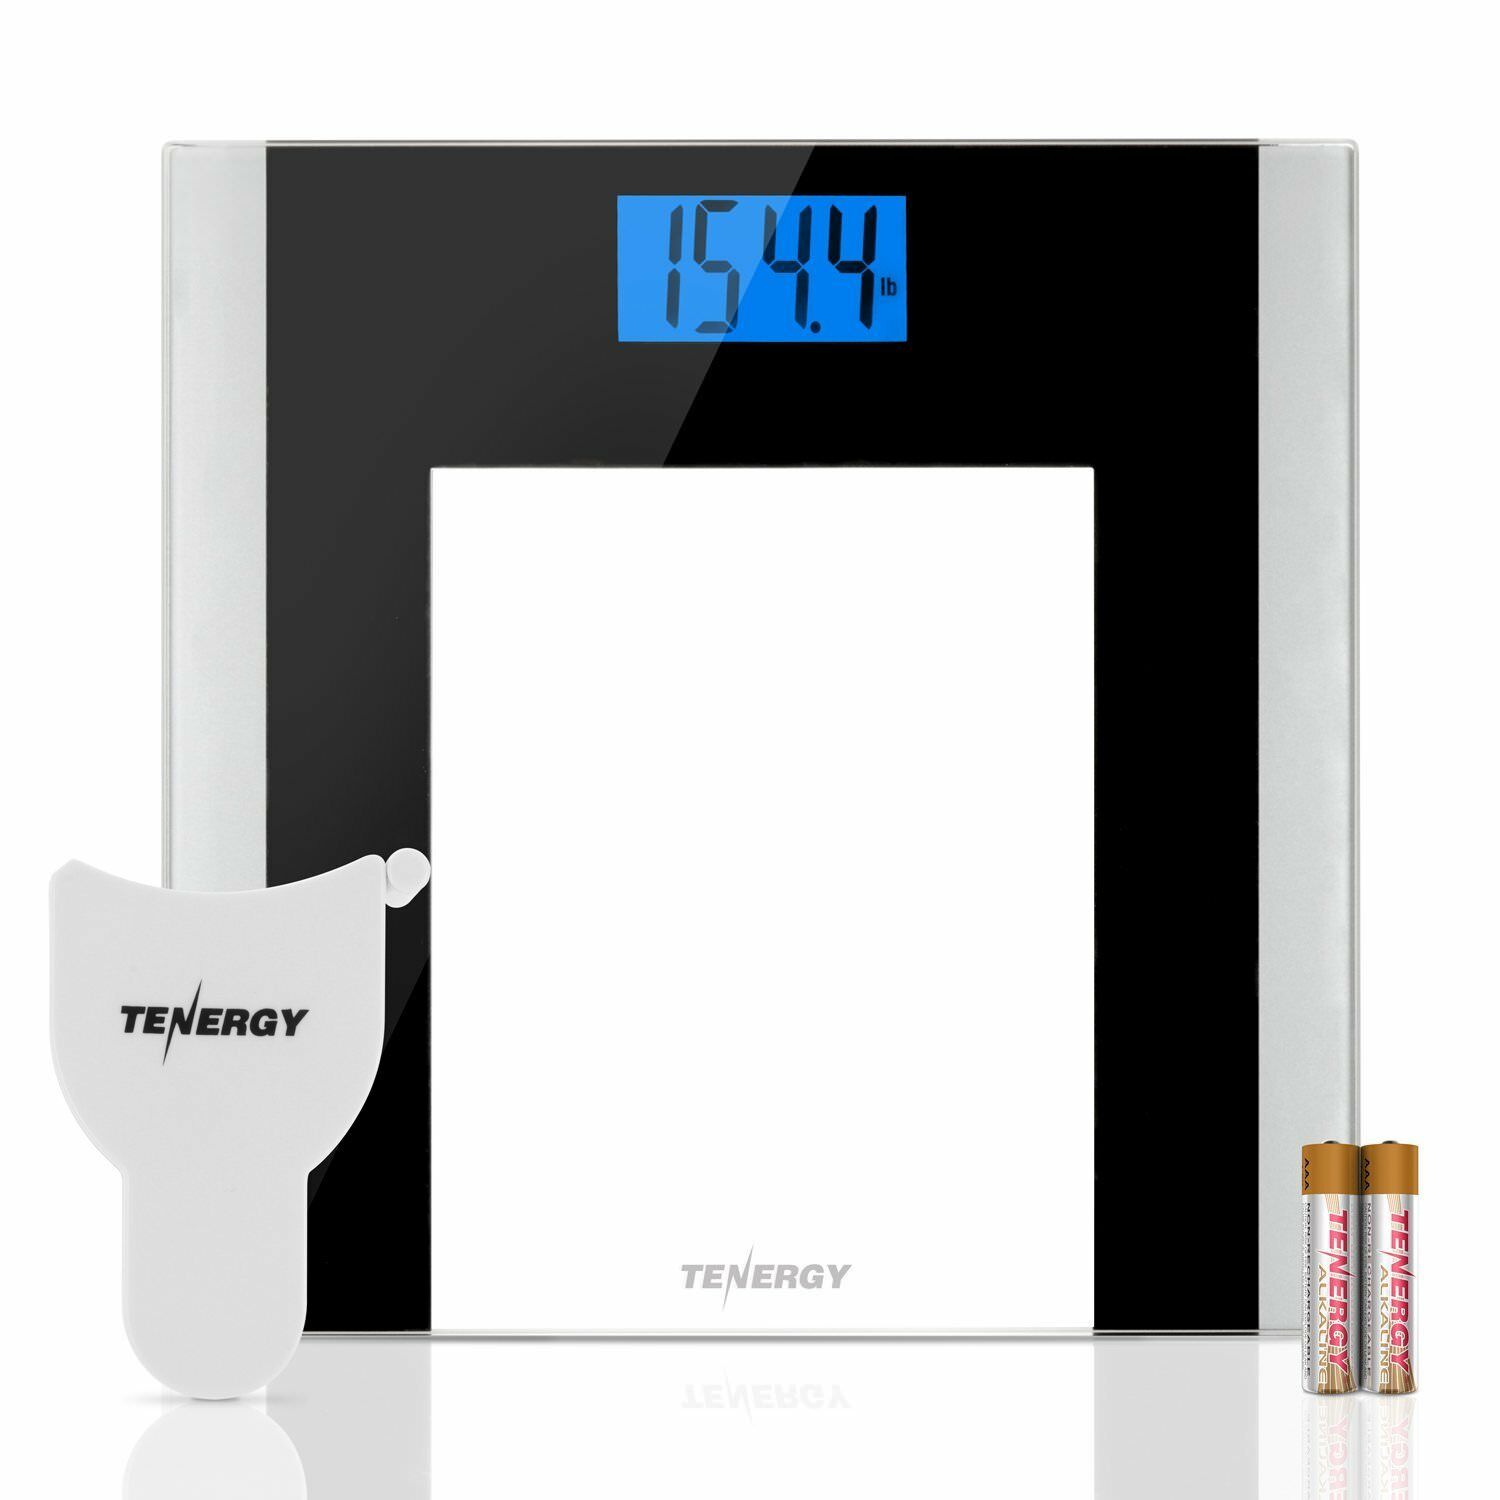 Tenergy Body Weight Scale 400 Pounds Digital Bathroom Scale Body Measuring Tape